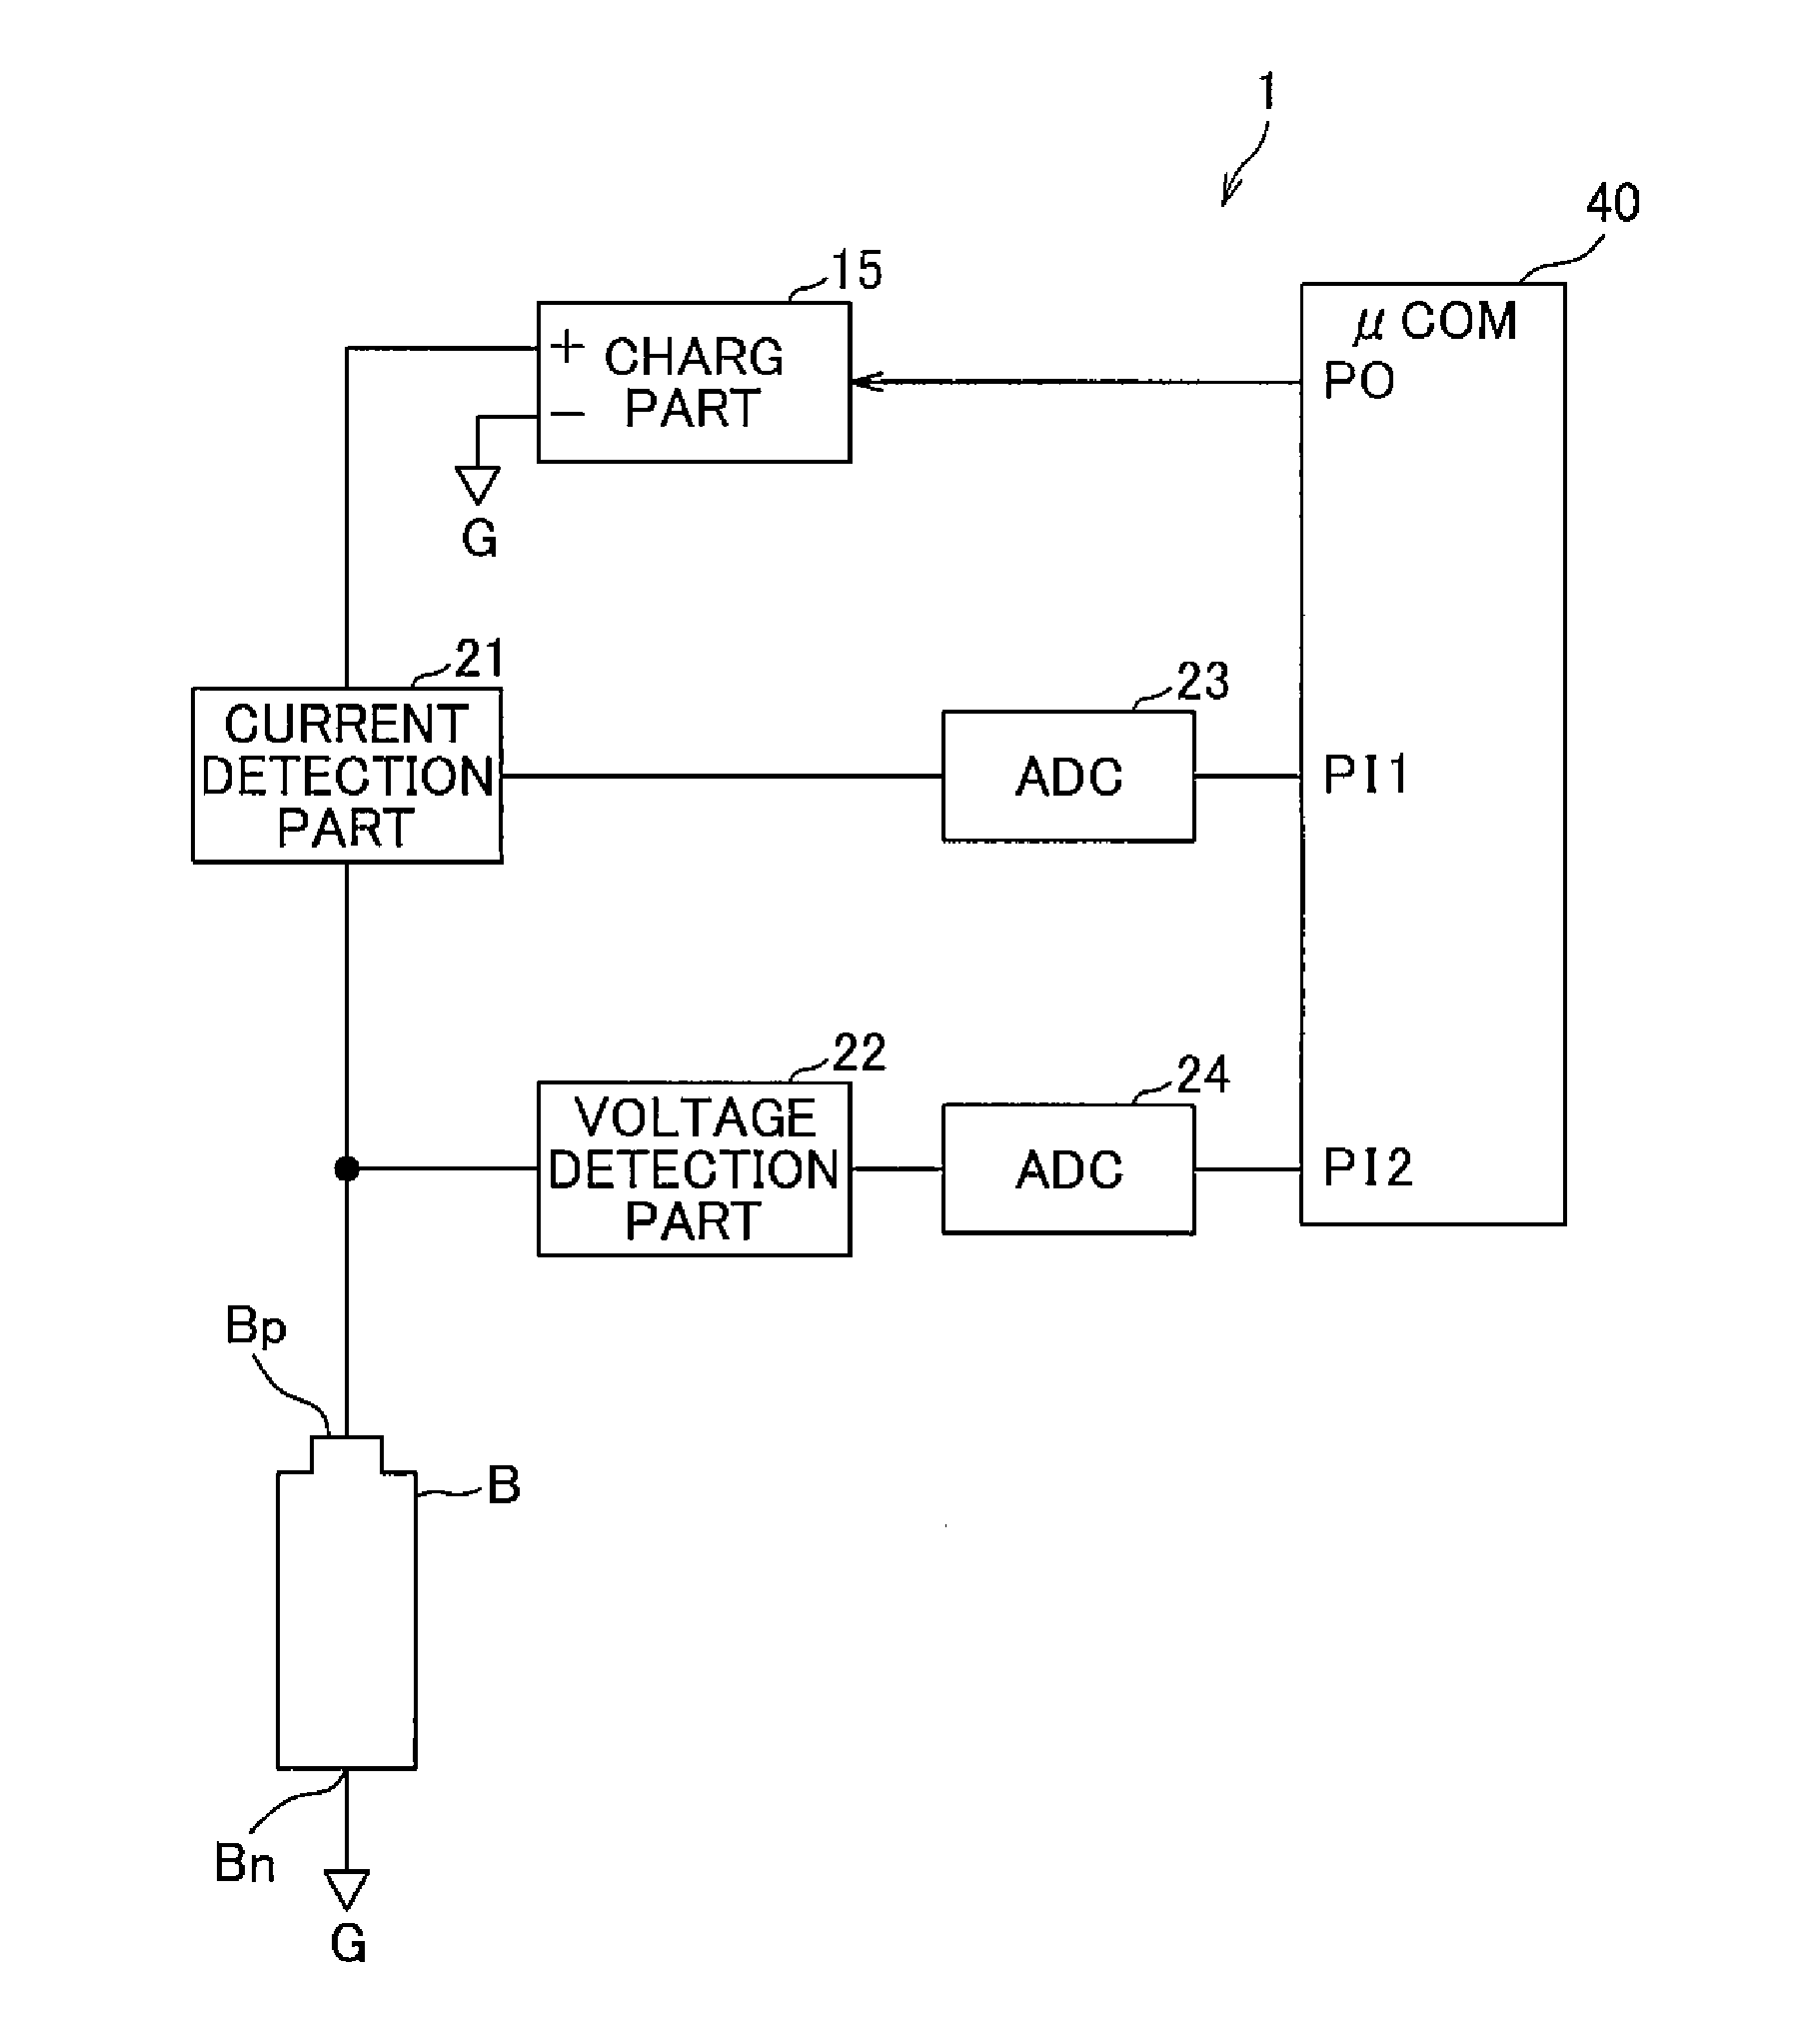 Battery state detection device